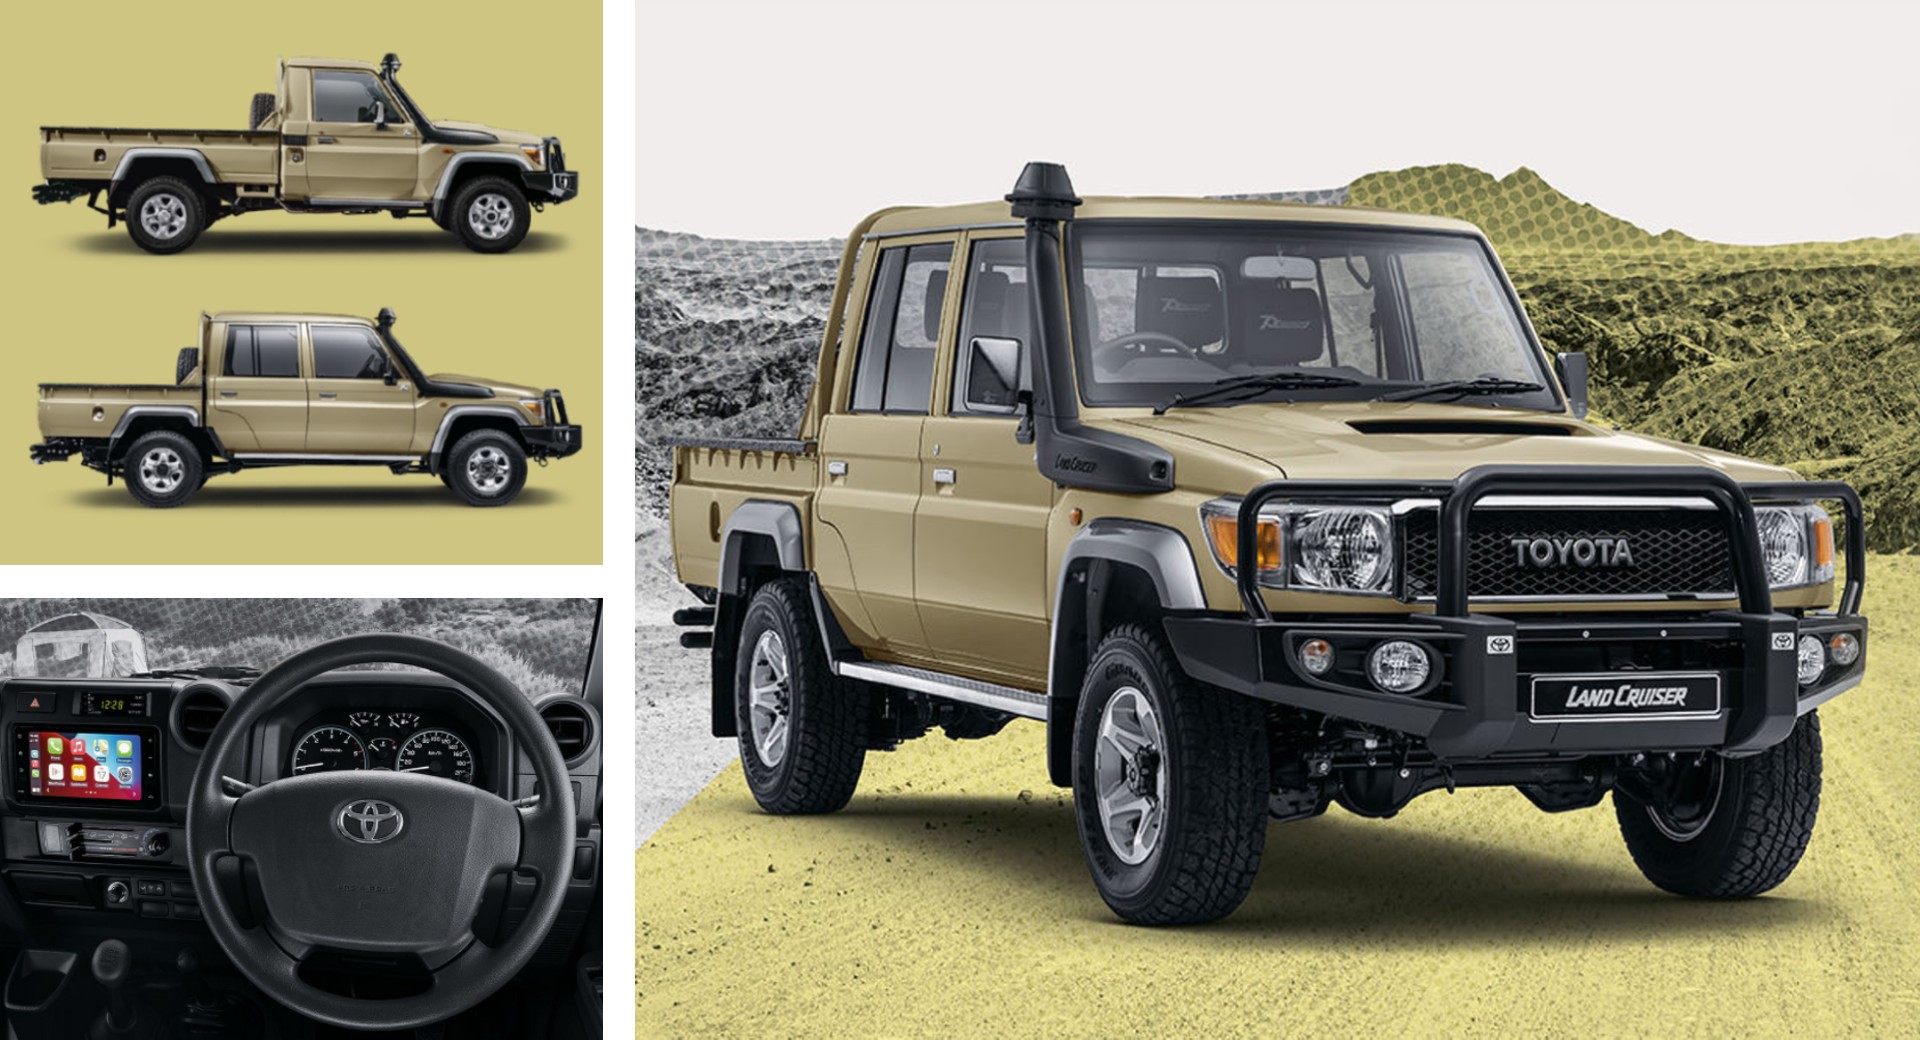 Toyota Land Cruiser 70 Series Gains 70th Anniversary Edition Pickups In